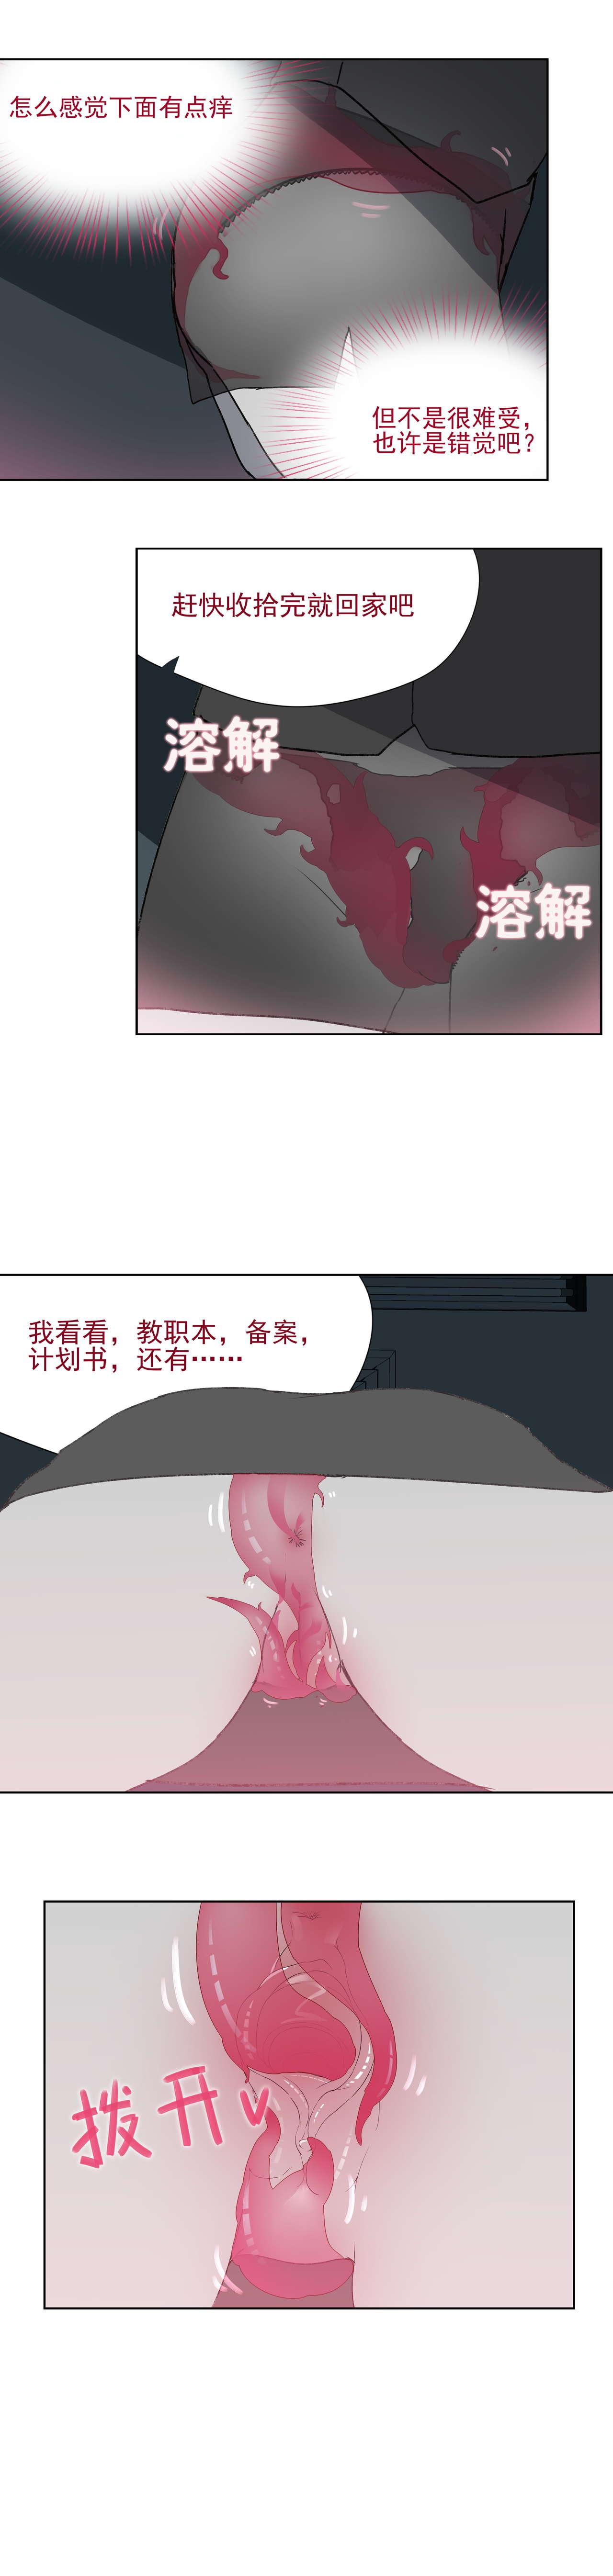 Old And Young 寄生之恋 Tentacle love - Original Massage Creep - Page 5